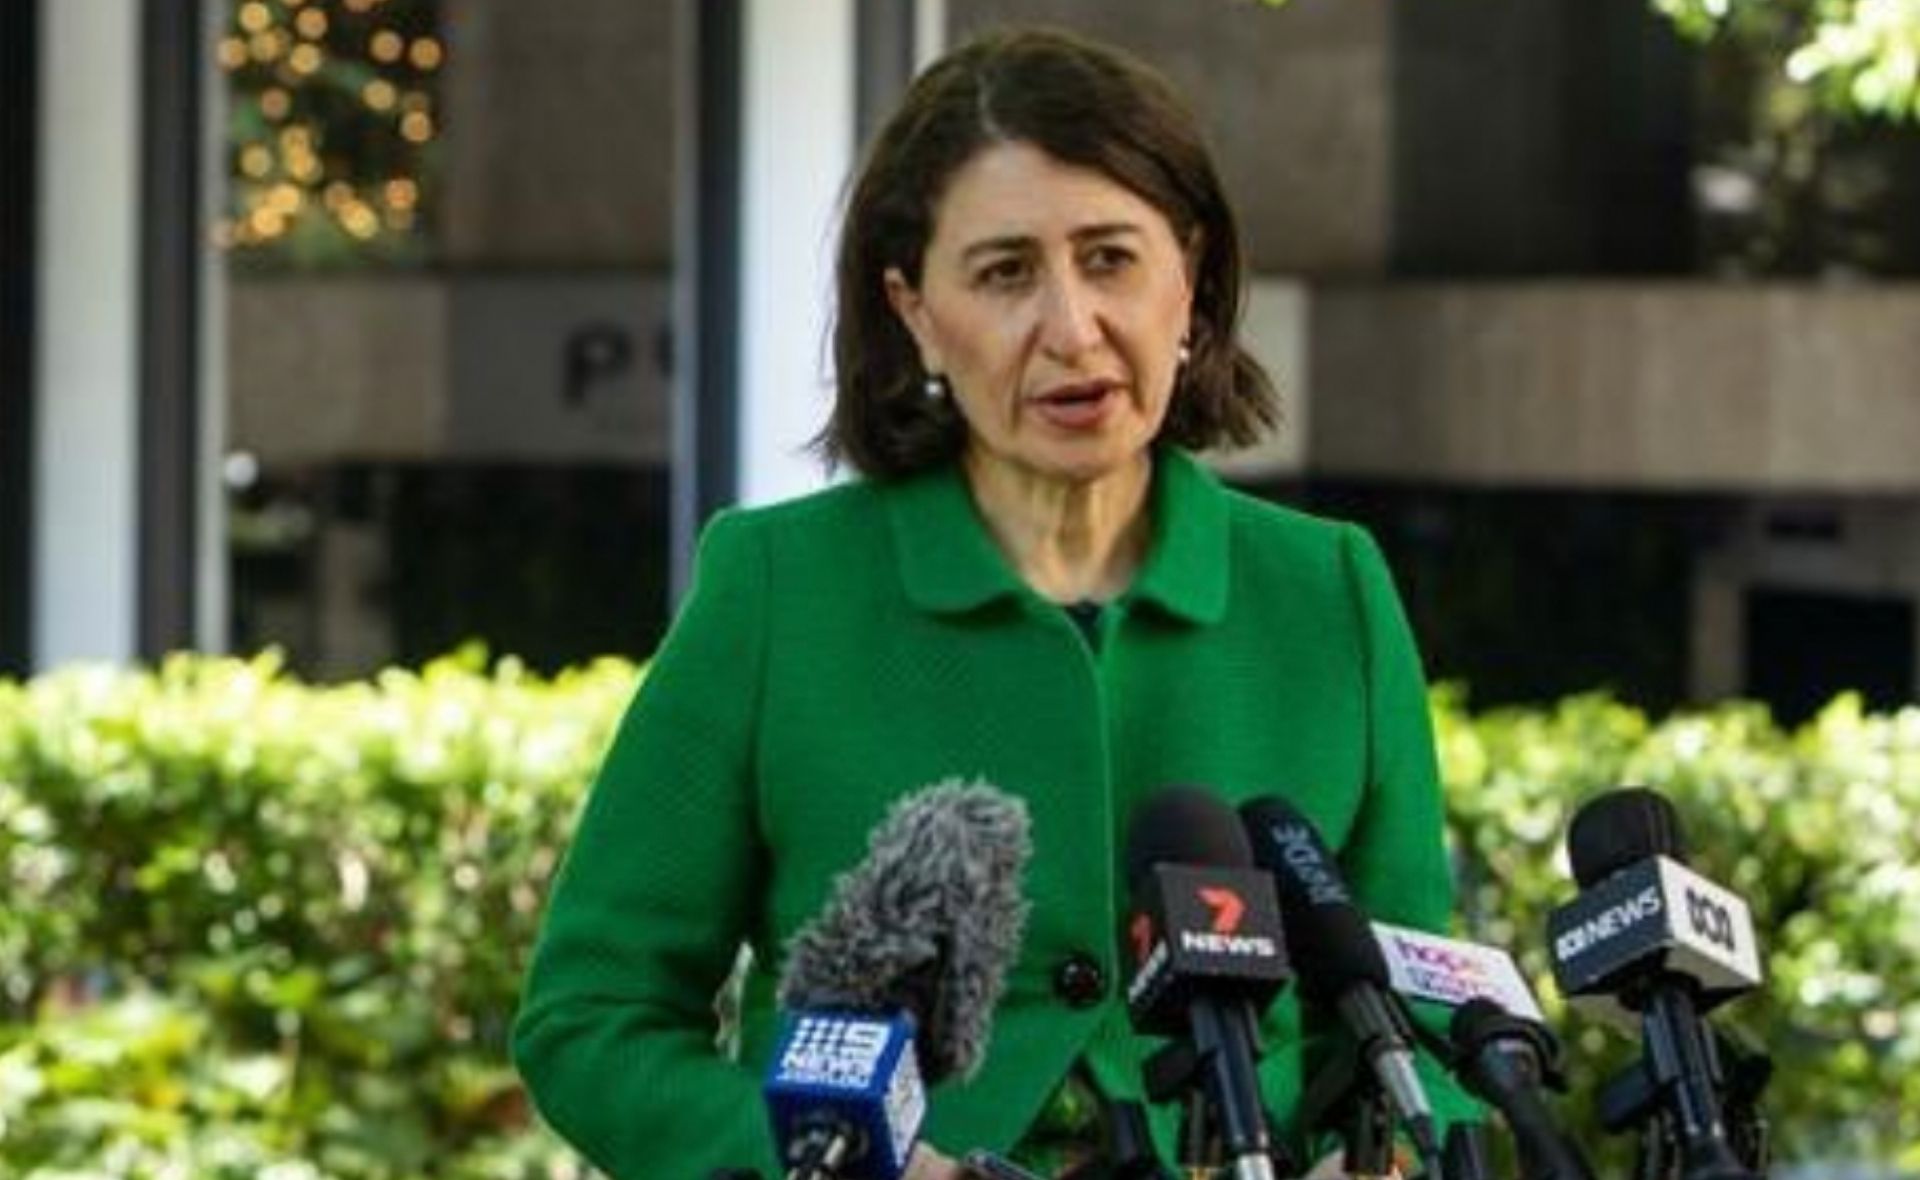 Newly resigned NSW Premier Gladys Berejiklian has the best response when people ask her about marriage and kids